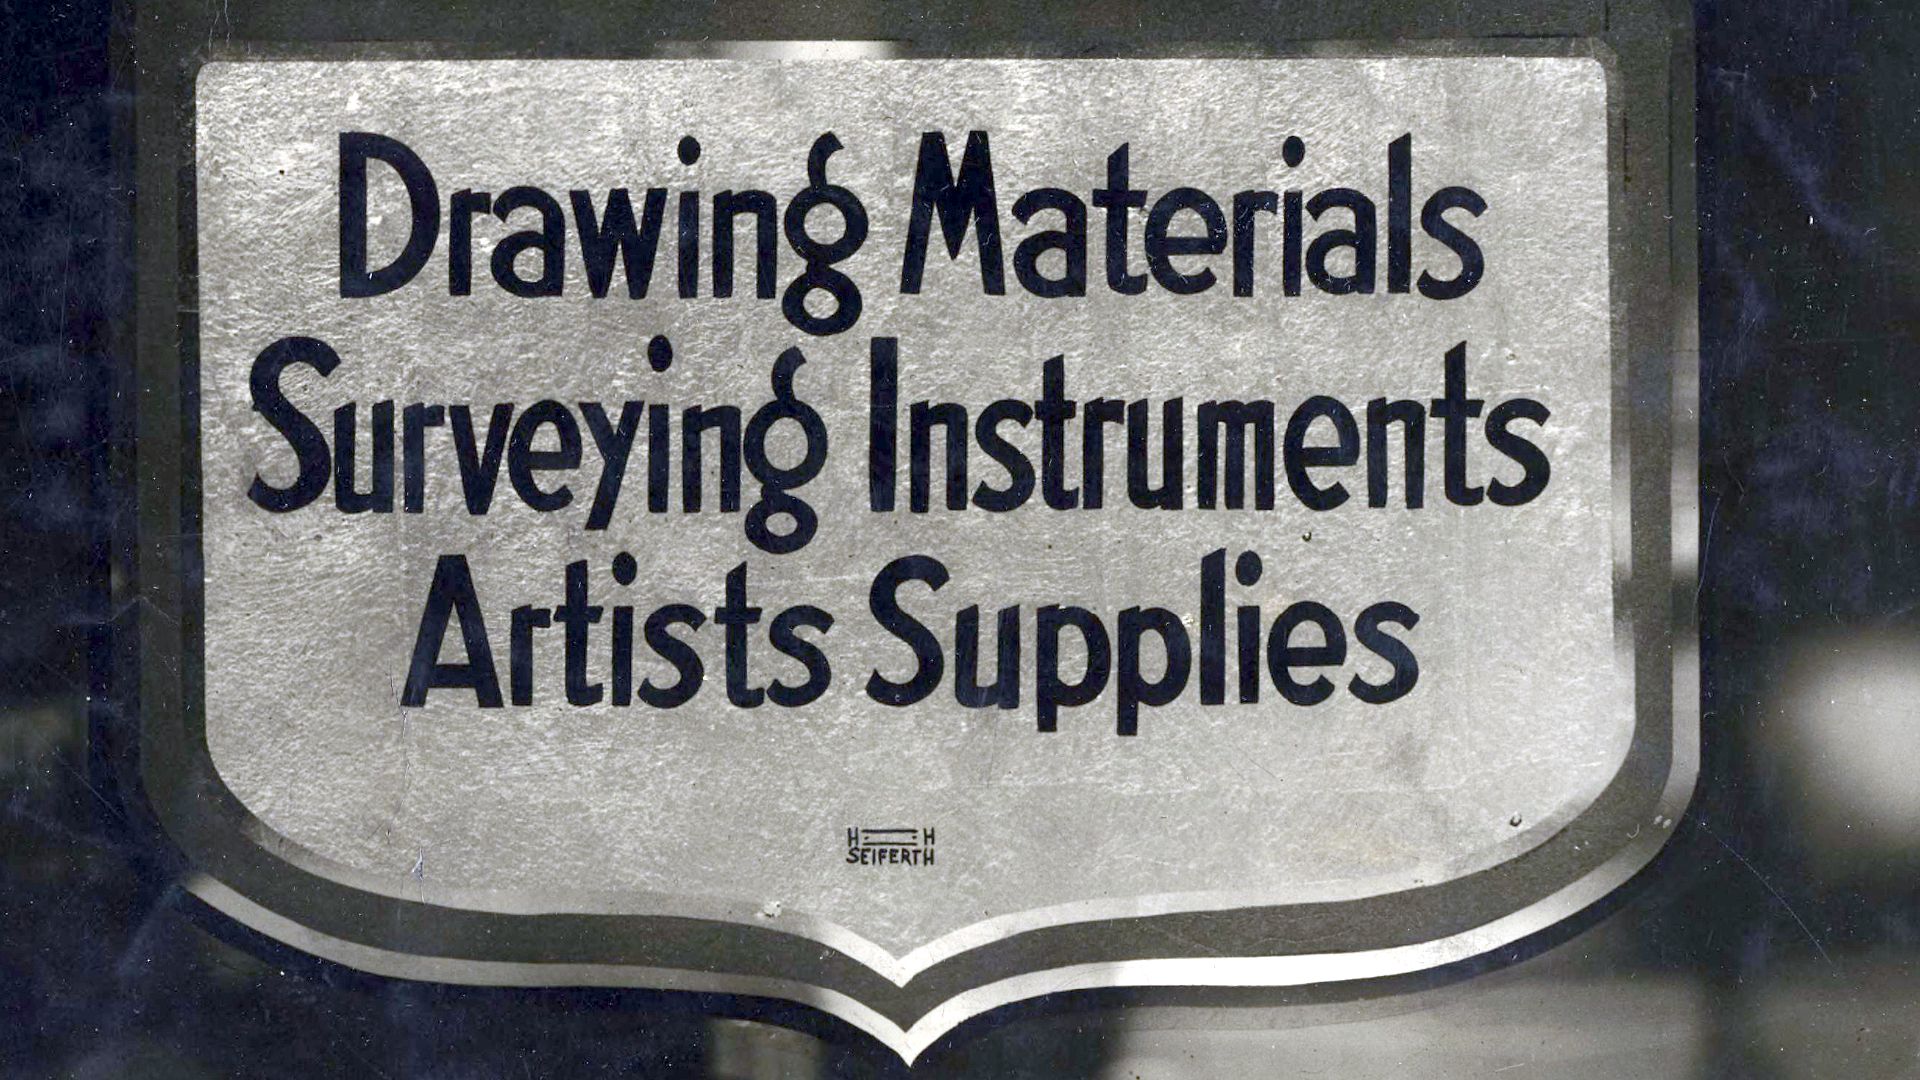 Plaque-shaped sign with hand-painted words, "Drawing materials, surveying instruments, artists supplies".